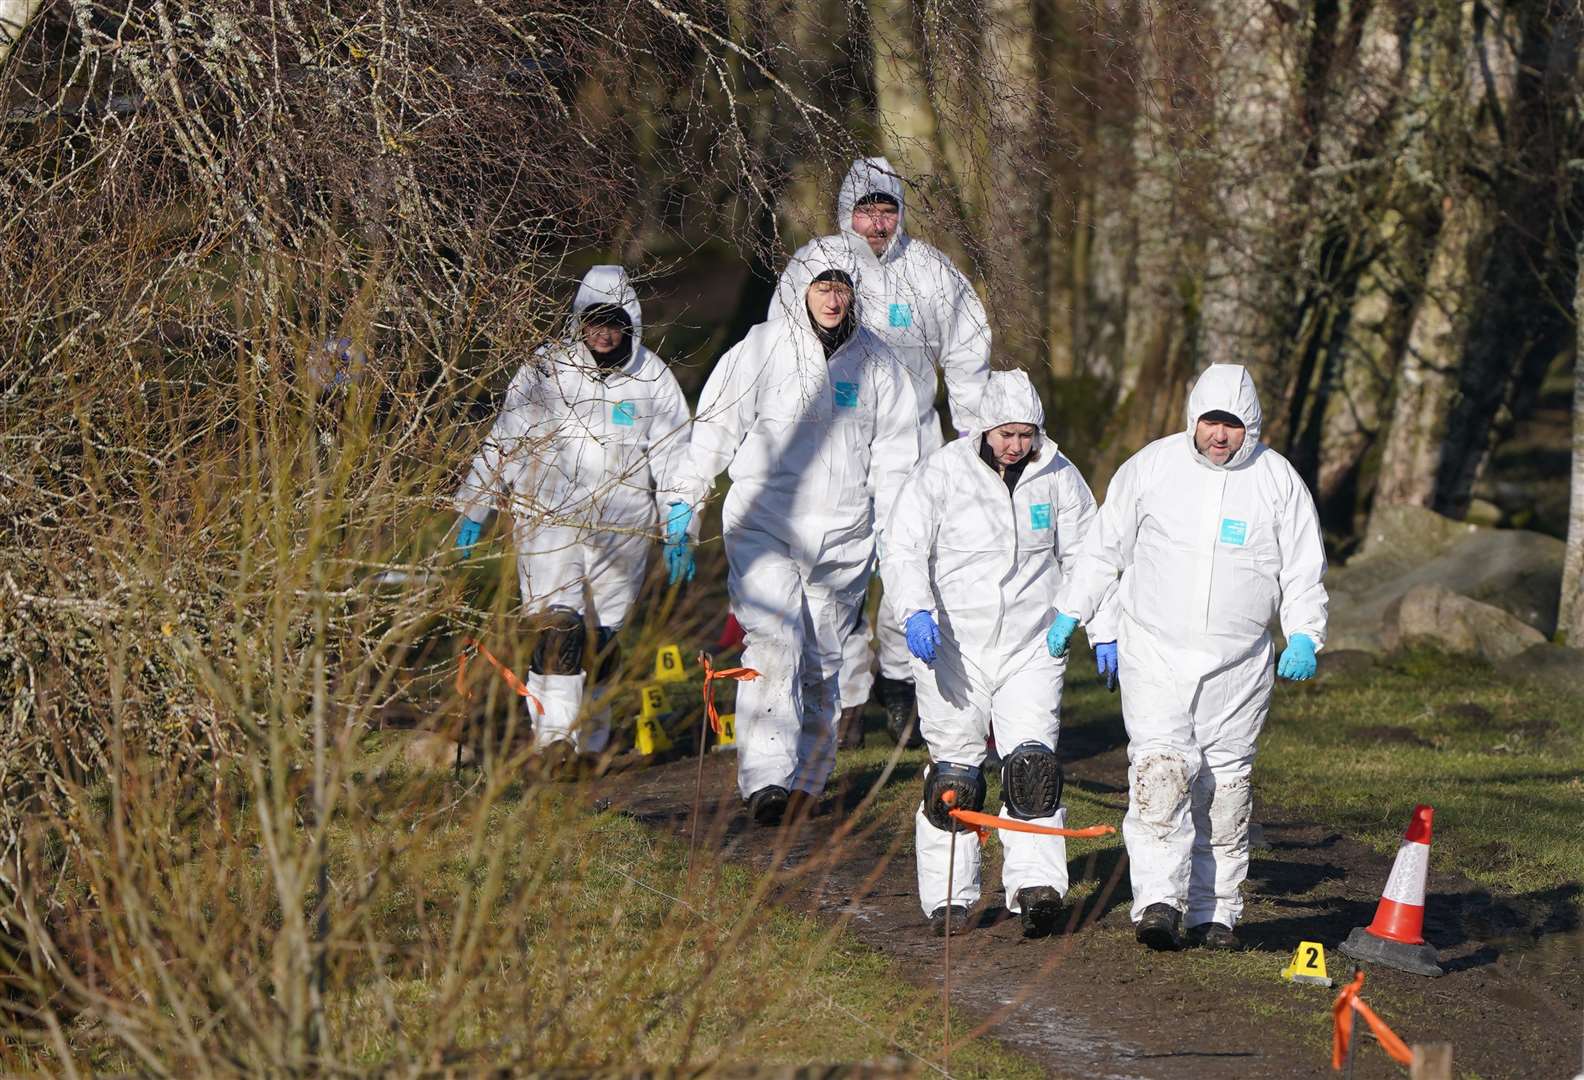 Police have been carrying out investigations at the scene (Andrew Milligan/PA)